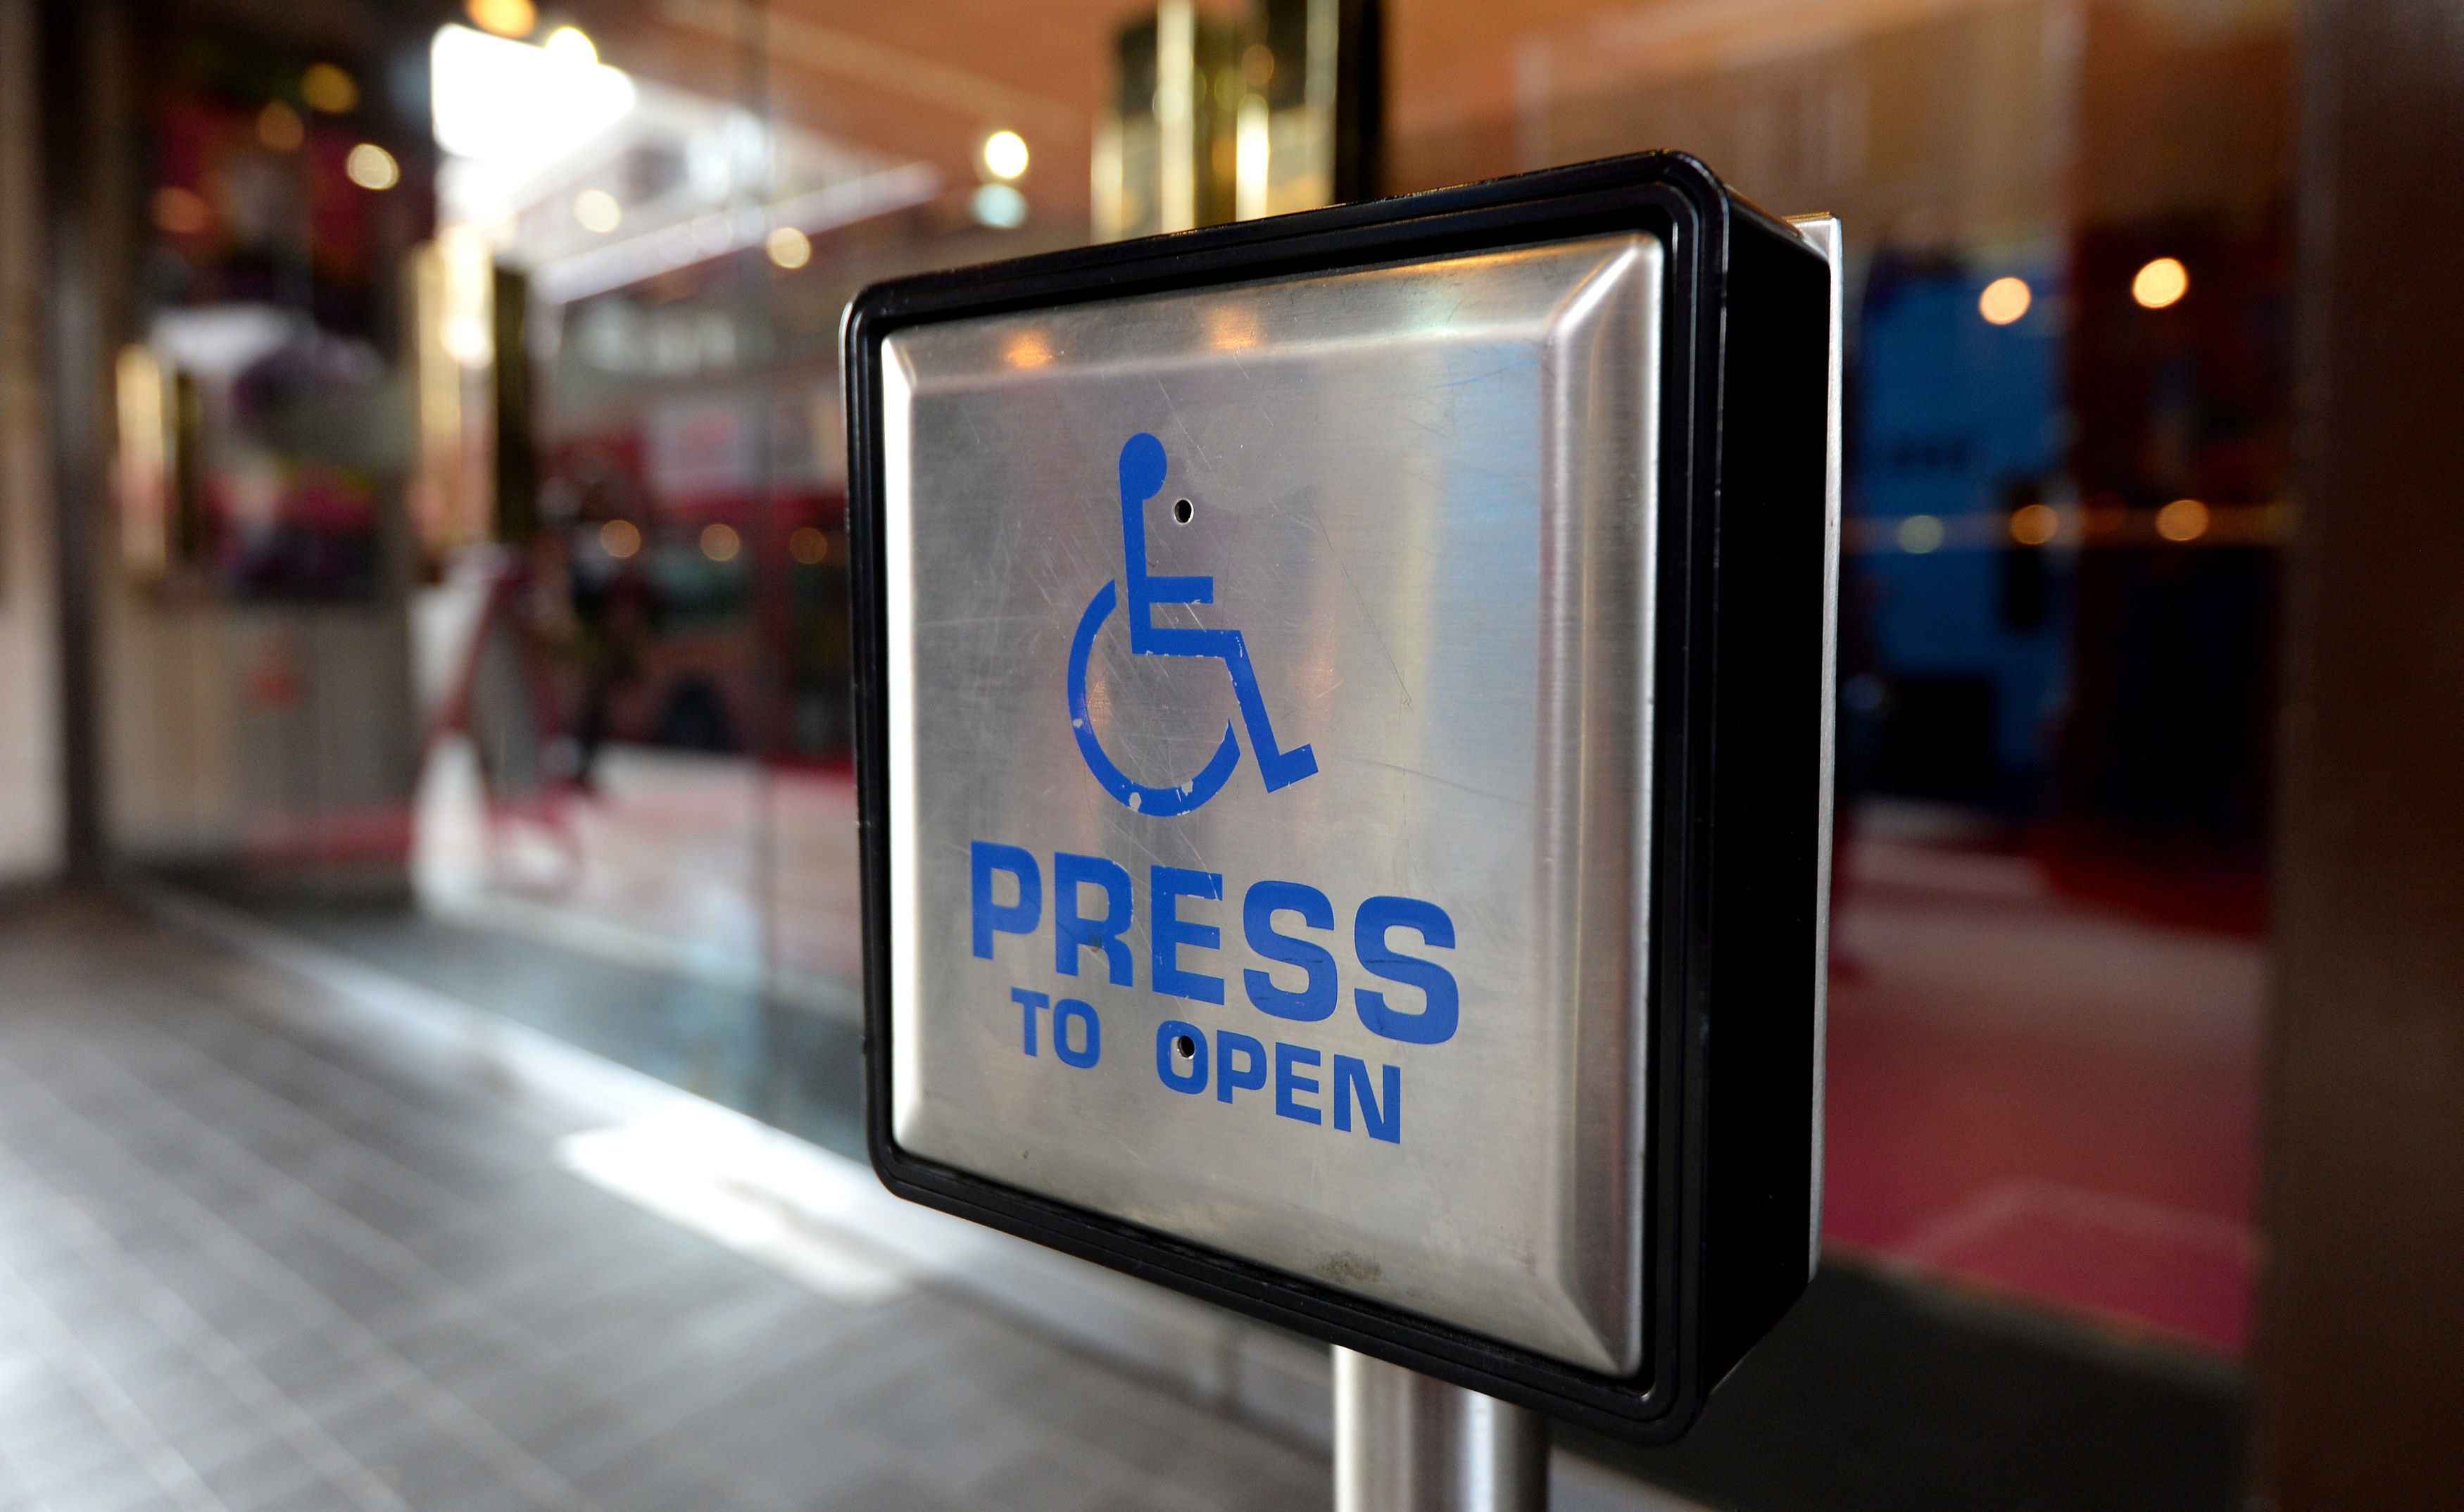 The Leonard Cheshire Disability charity said its poll of more than 500 employers showed that one in five managers say they would be less likely to employ a disabled person, believing they would struggle to do the job or citing concerns about the cost of workplace adjustments. (Andrew Matthews/PA Wire)